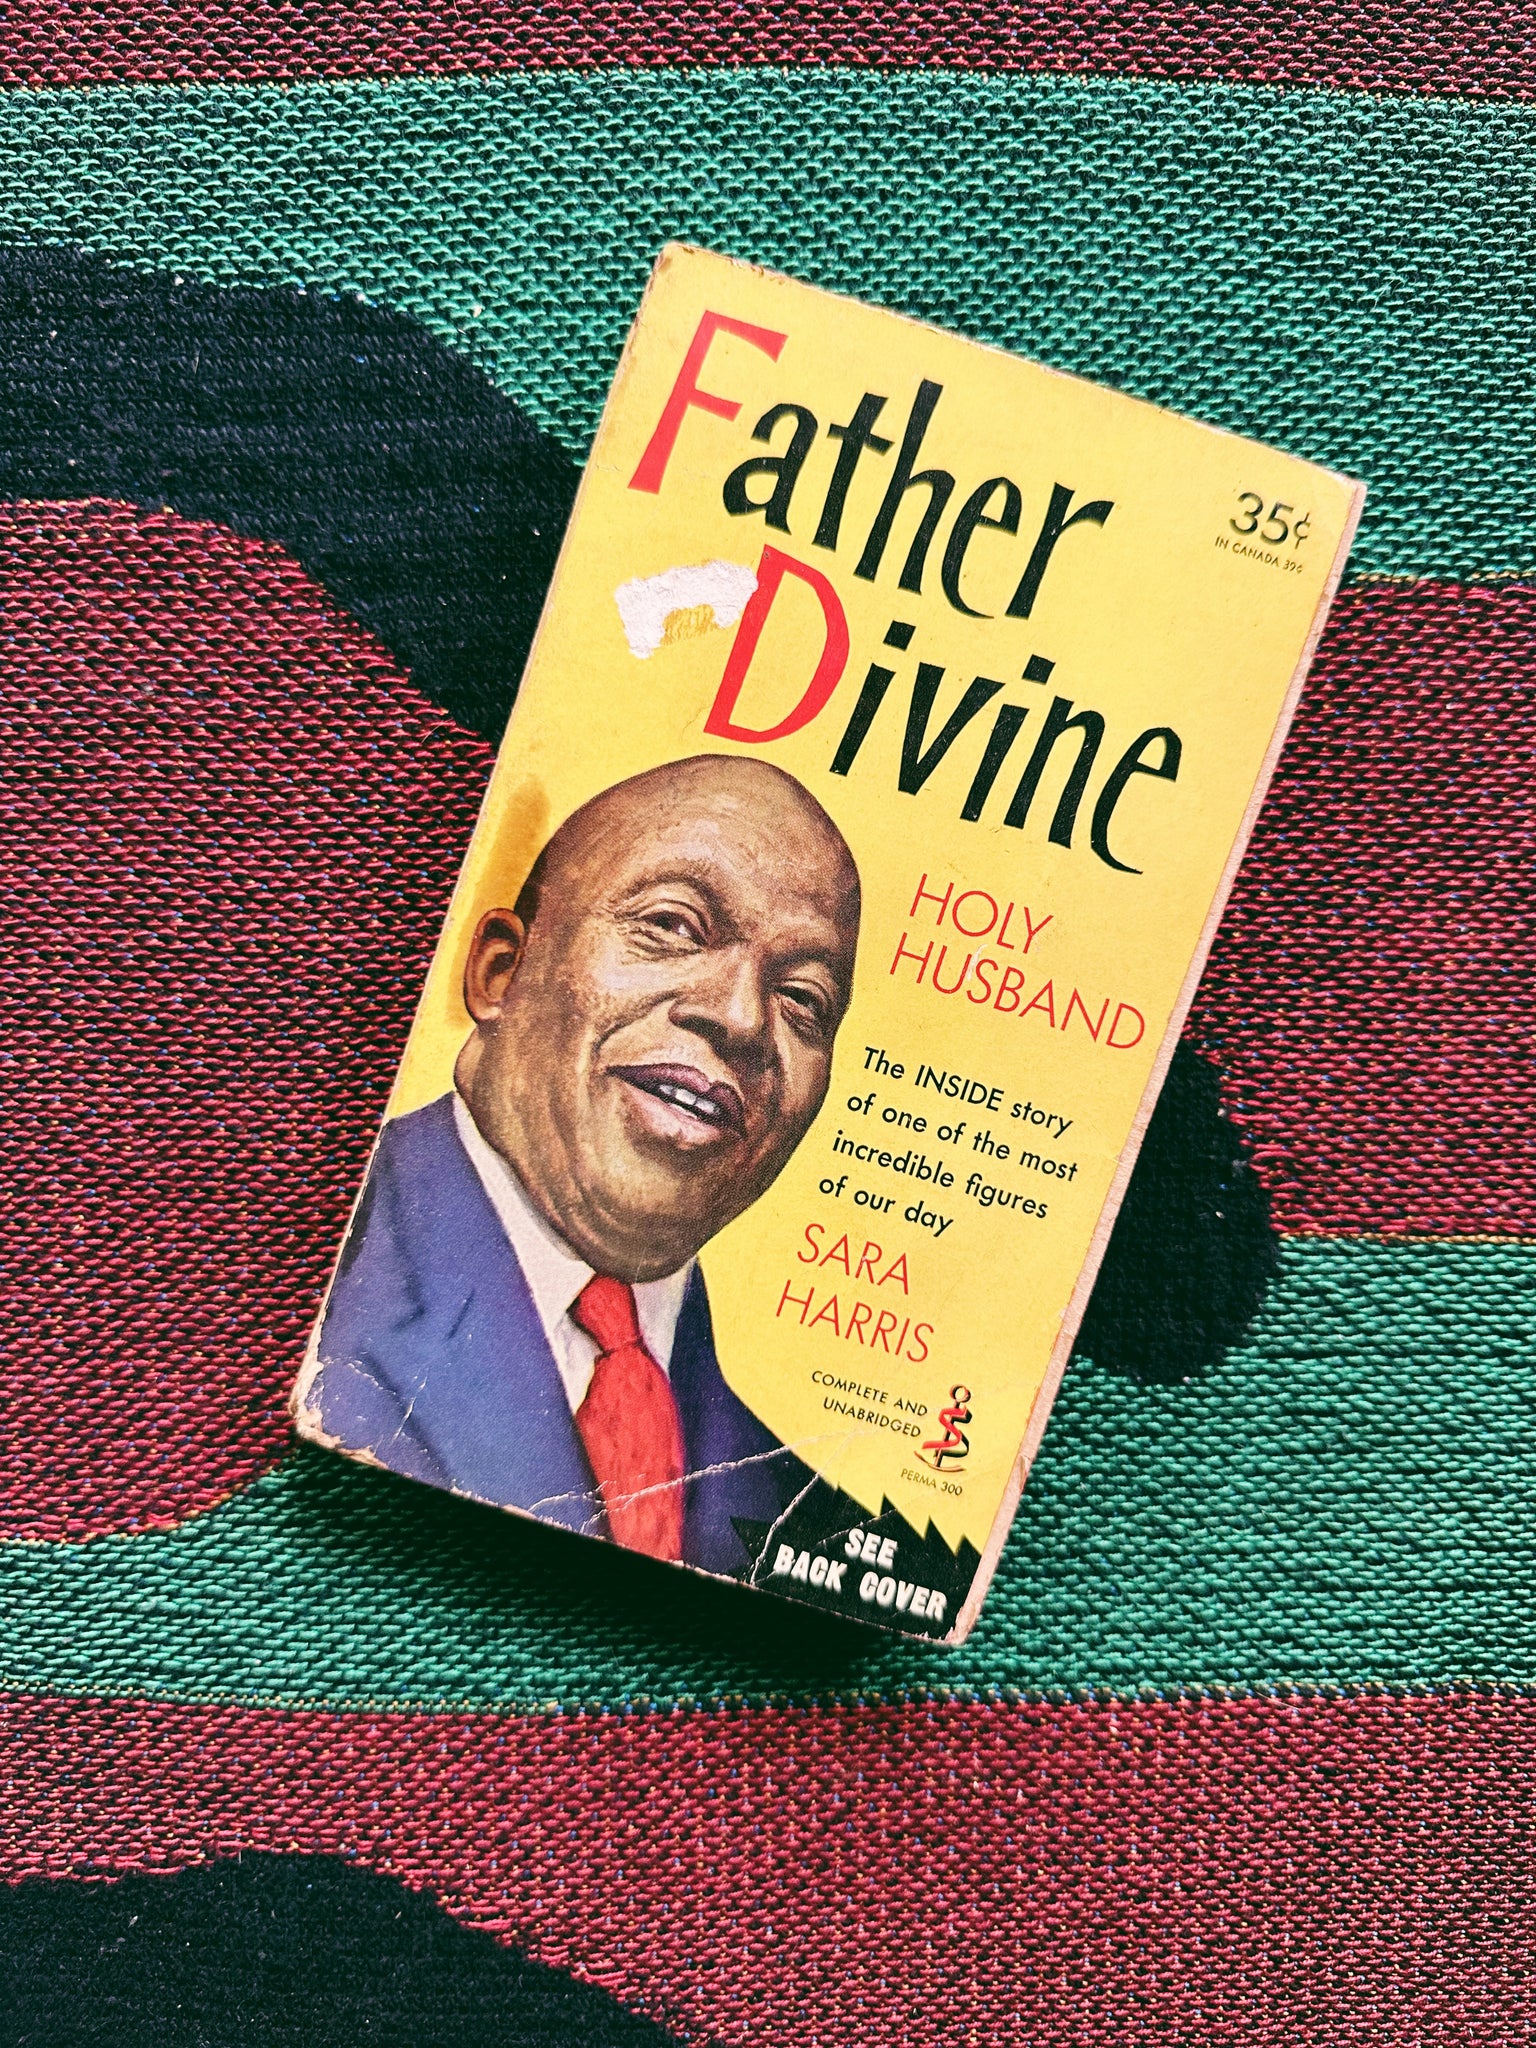 Vintage Softcover "Father Divine" by Sara Harris (Second Edition, 1971)